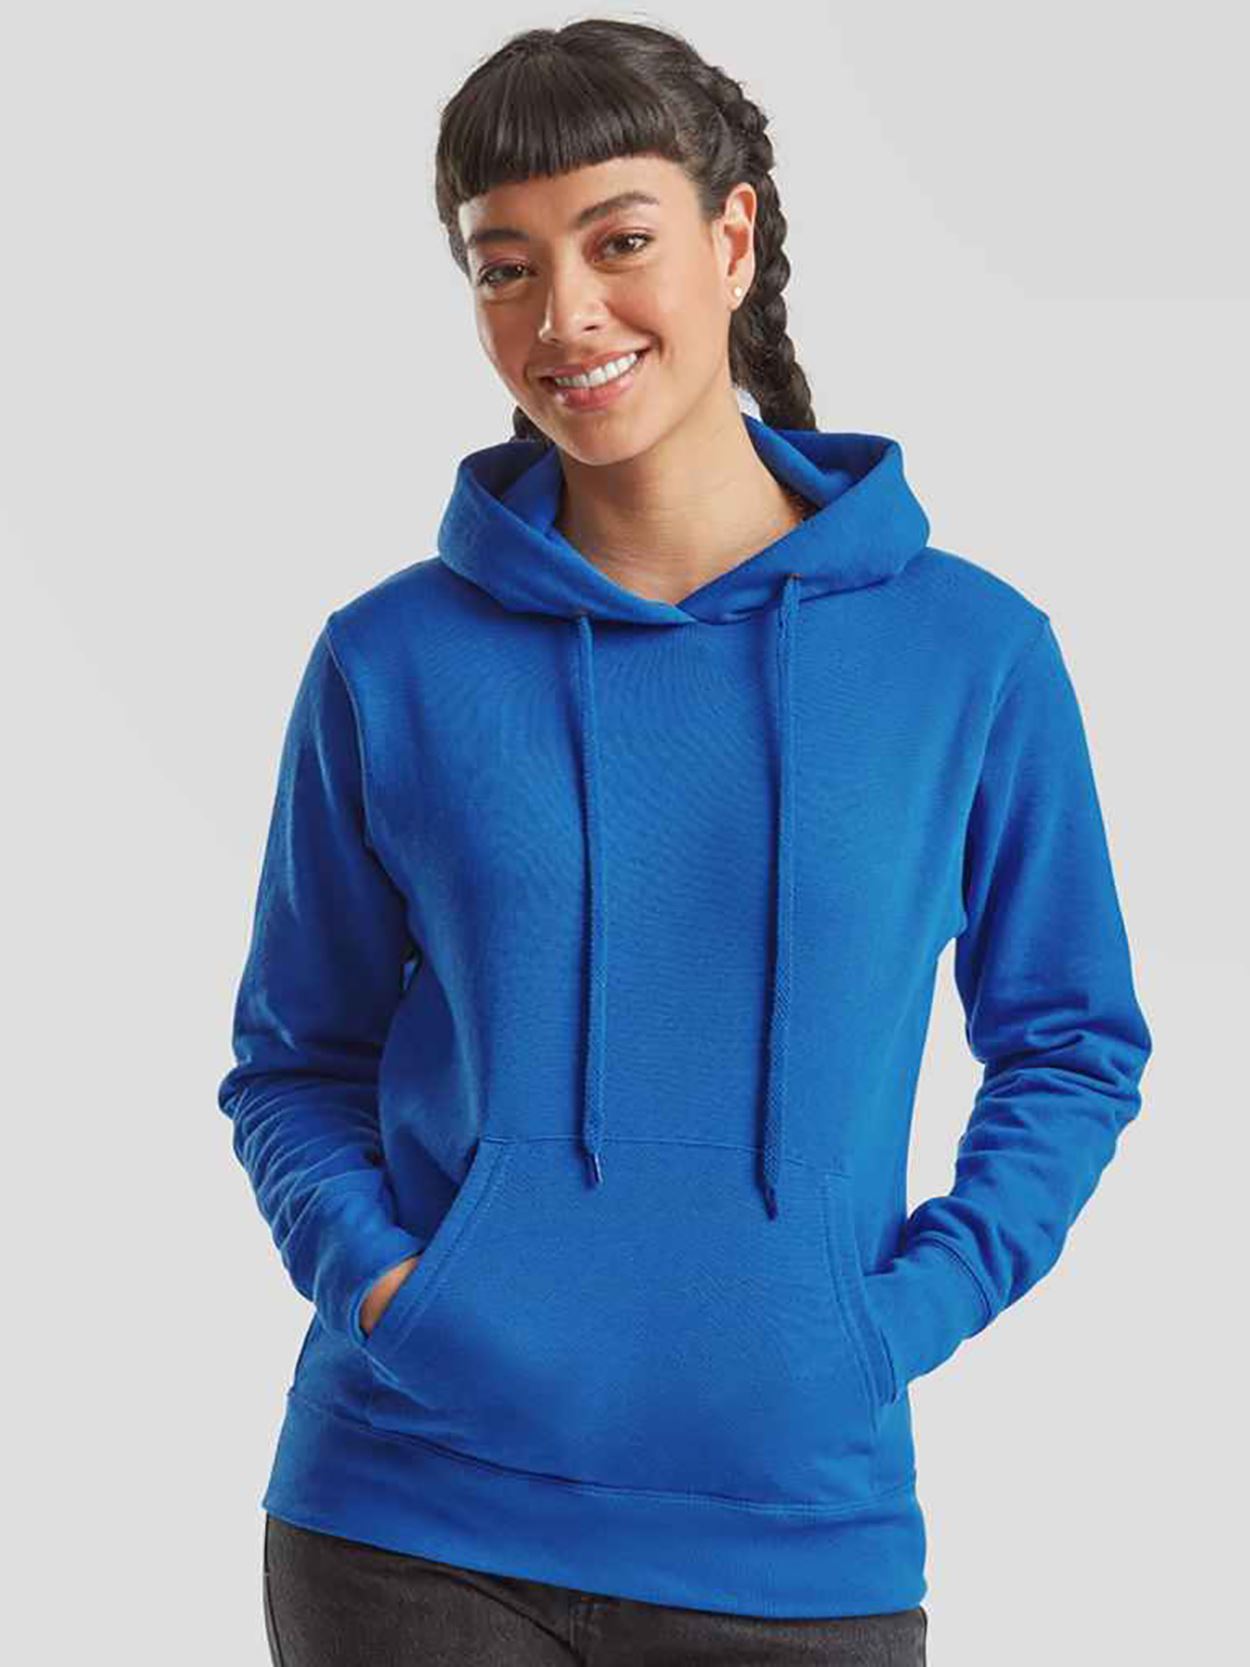 SS68 62038 Classic Lady Fit Hooded Sweatshirt Image 2